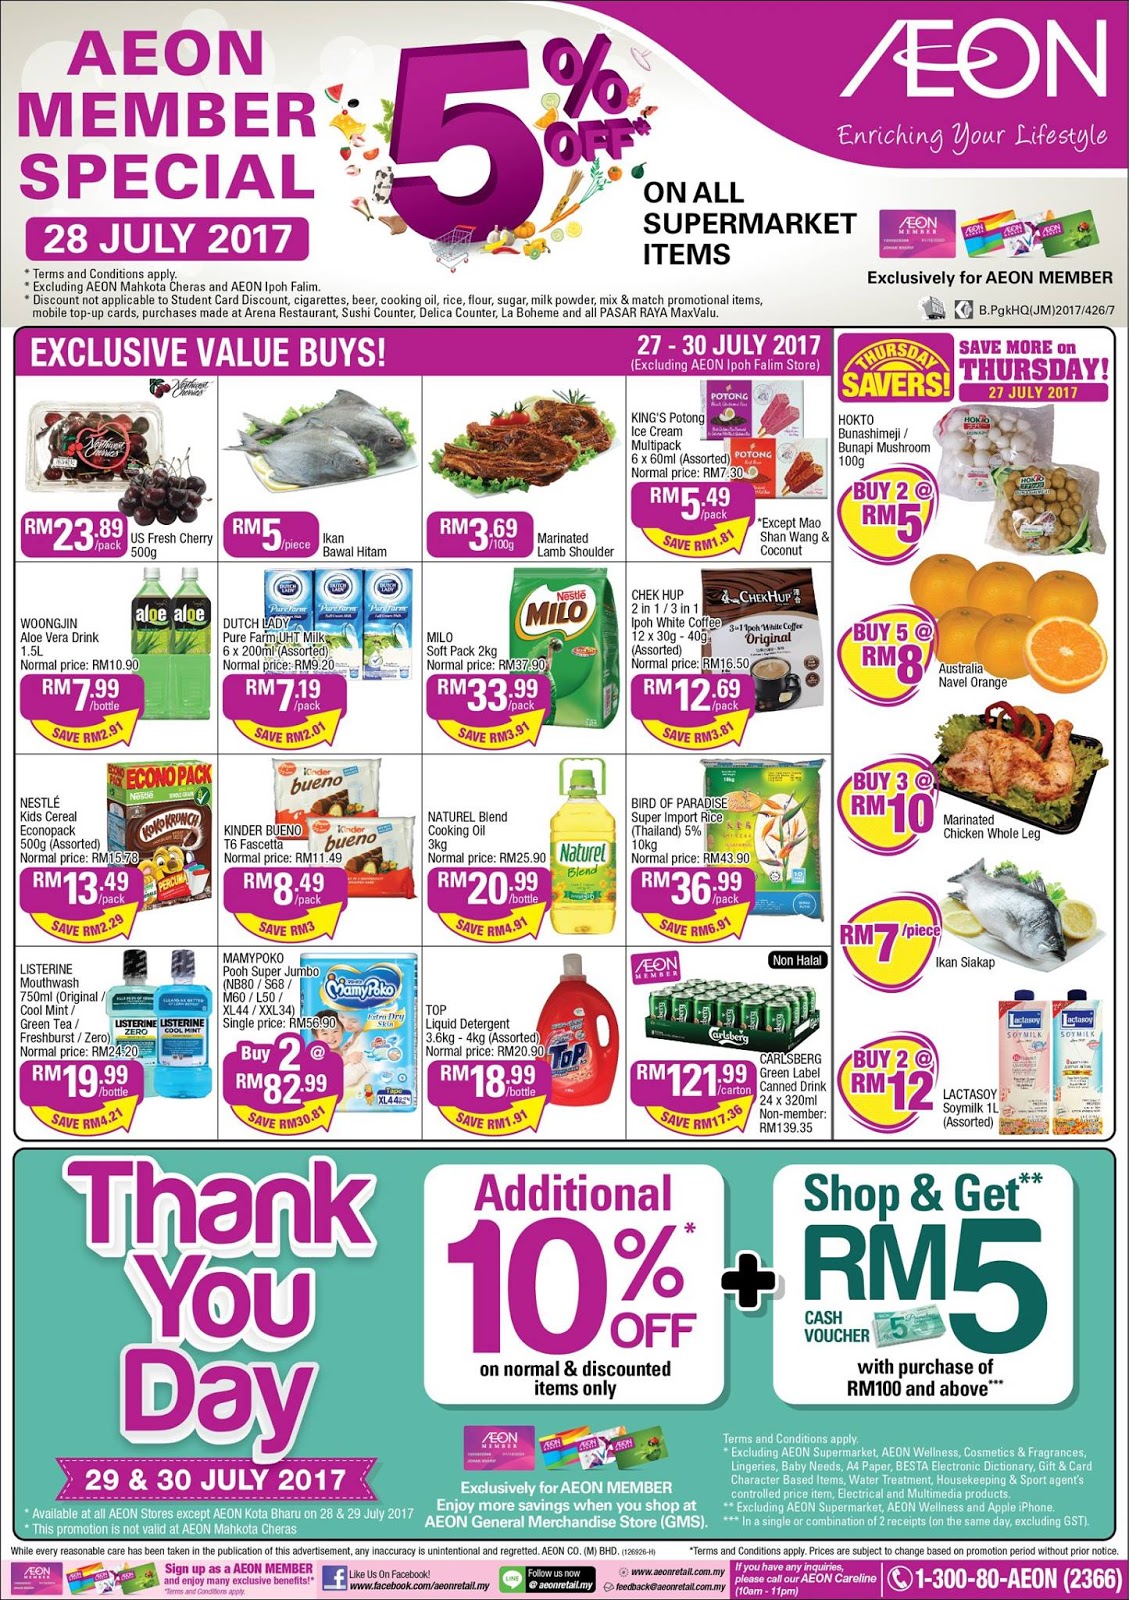 AEON Member Special 5% Discount on All Supermarket Items 28 July 2017